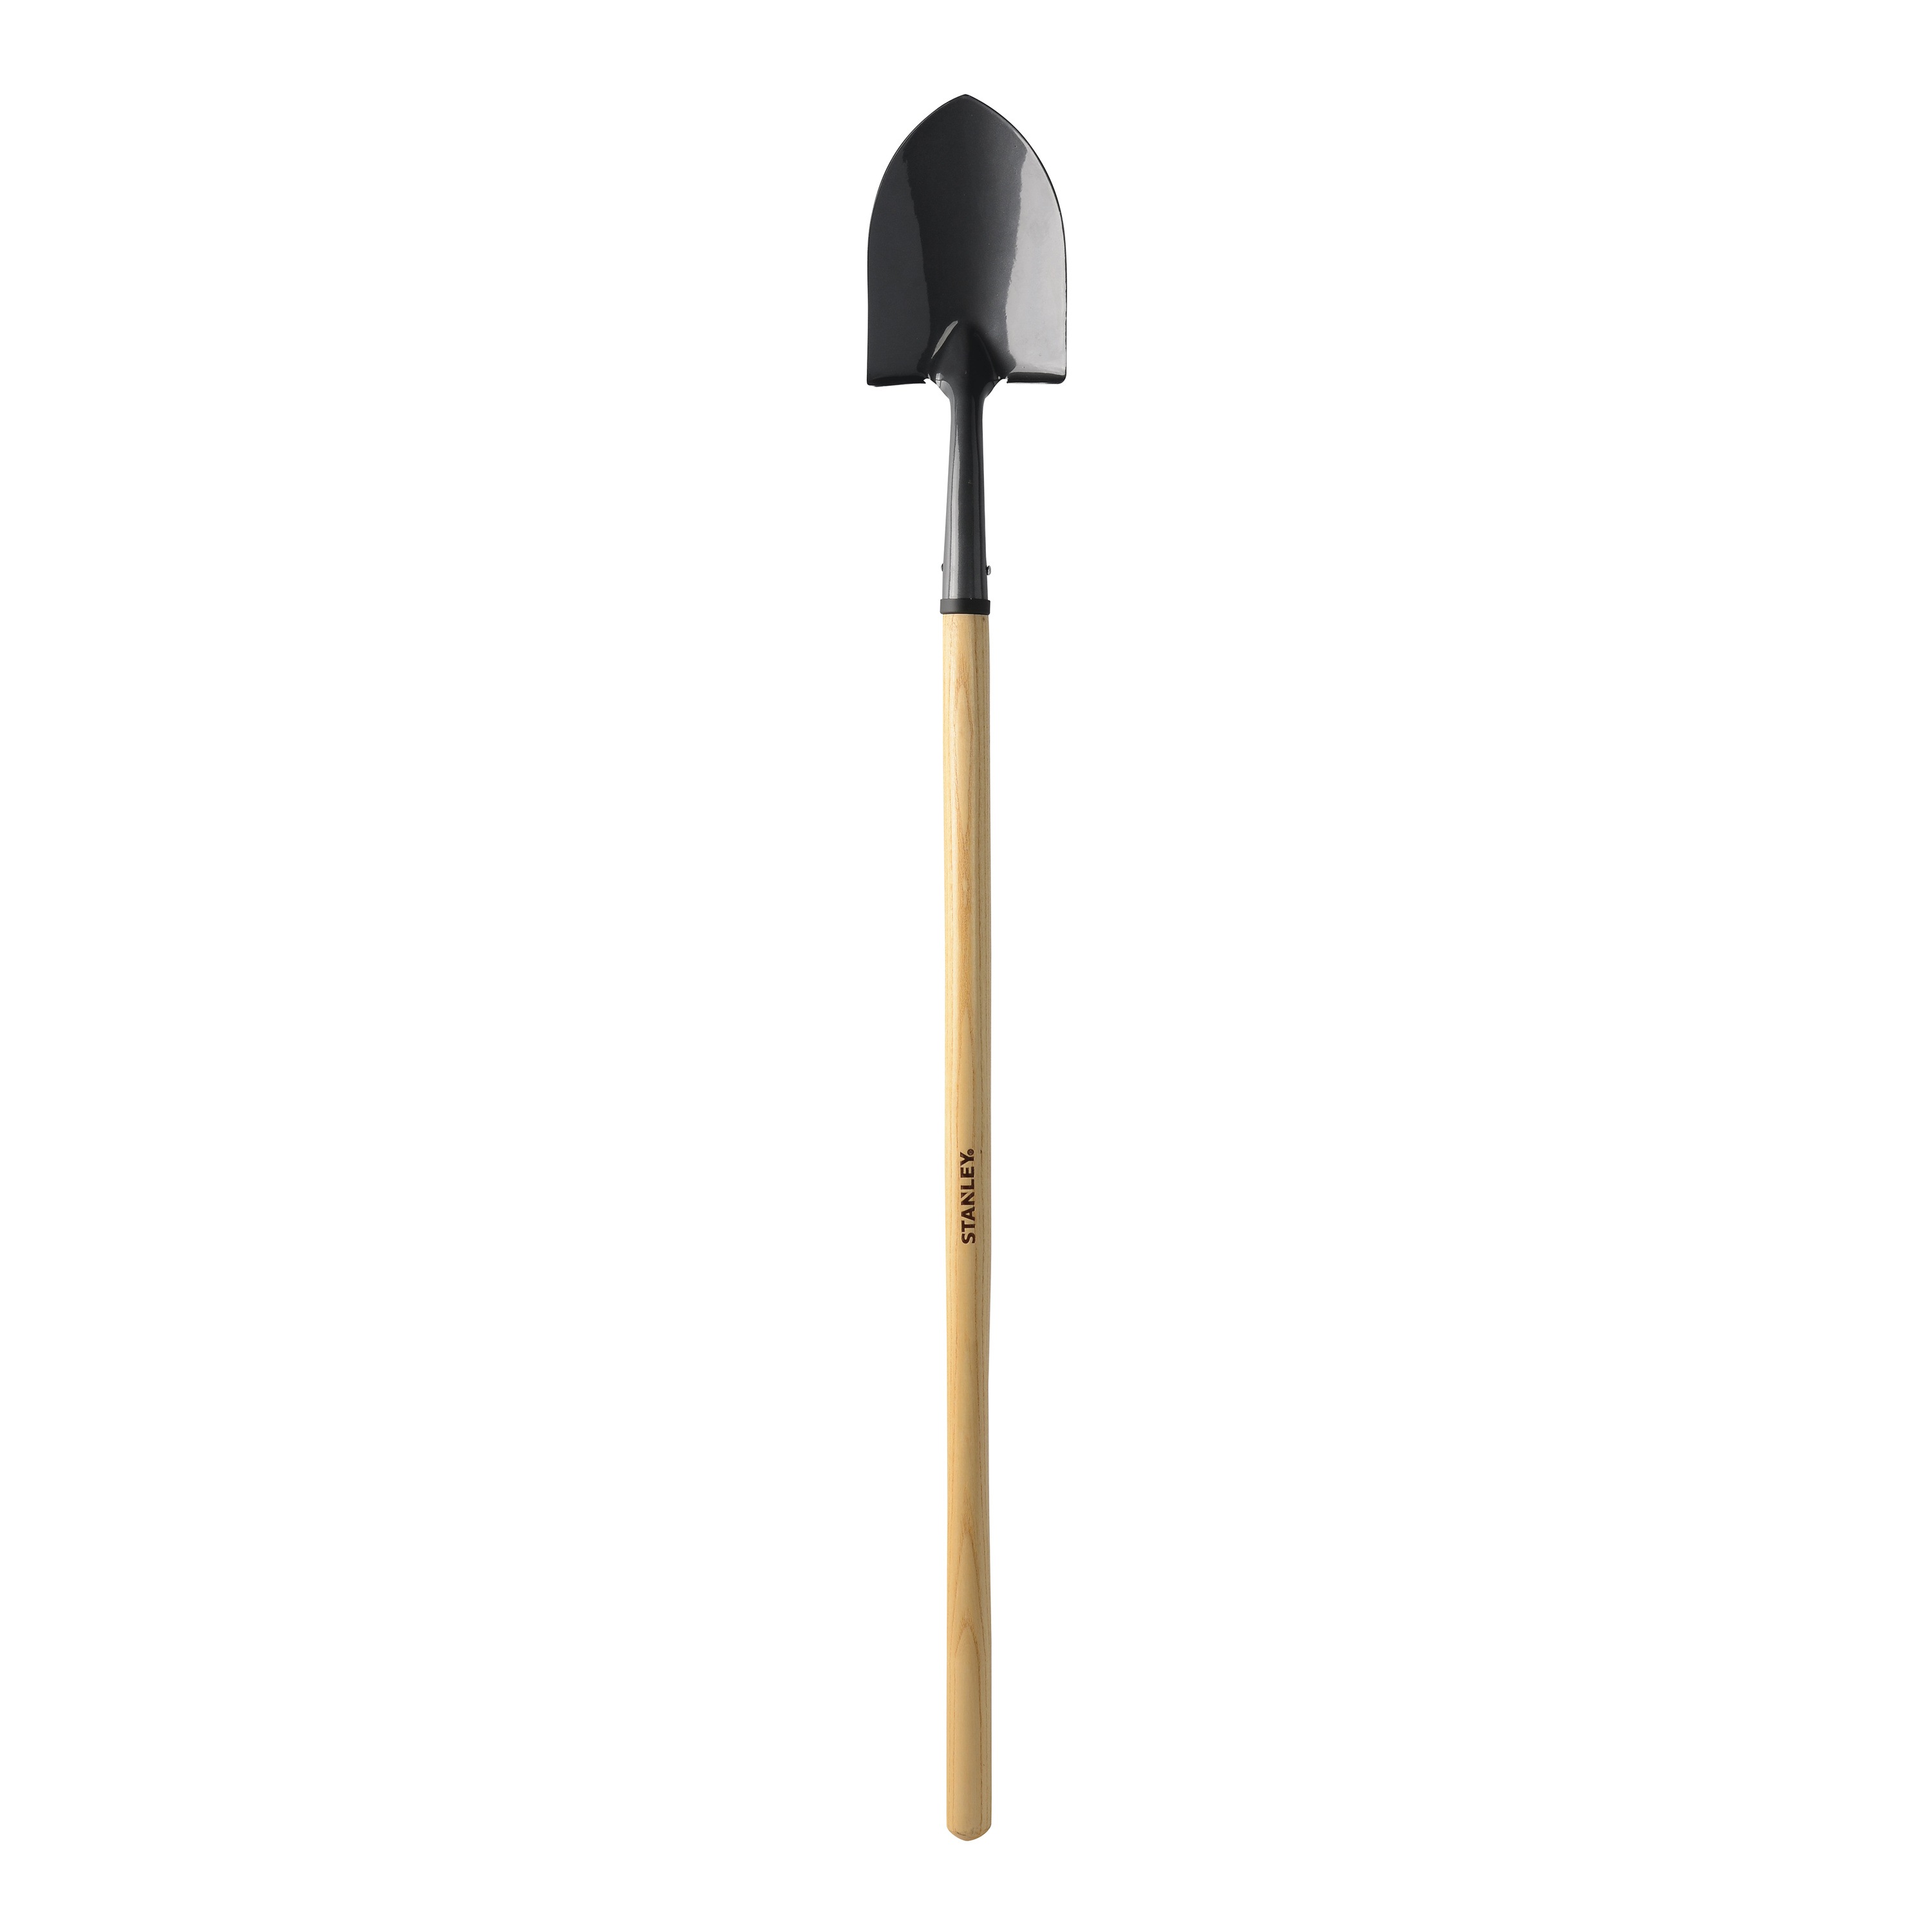 Stanley Tools - ACCUSCAPE HARDWOOD FLORAL ROUND POINT SHOVEL - BDS7117